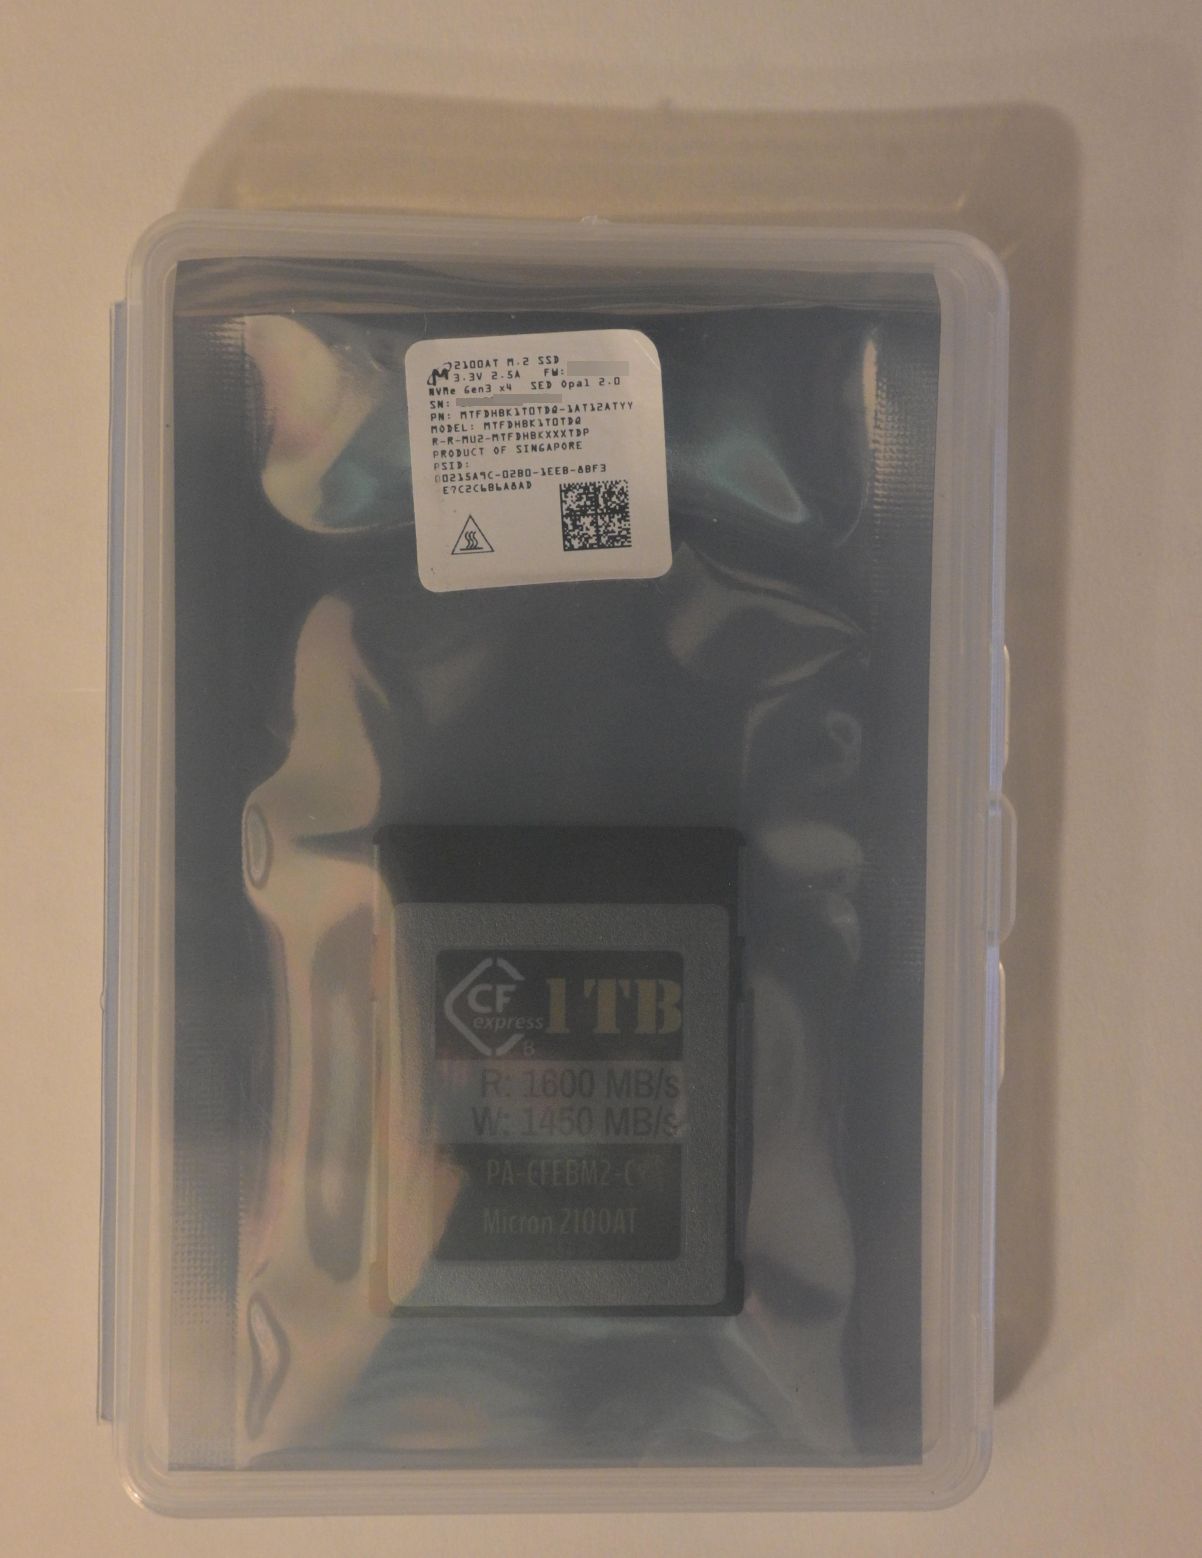 1TB card in case SN and Firmware blurred.jpg